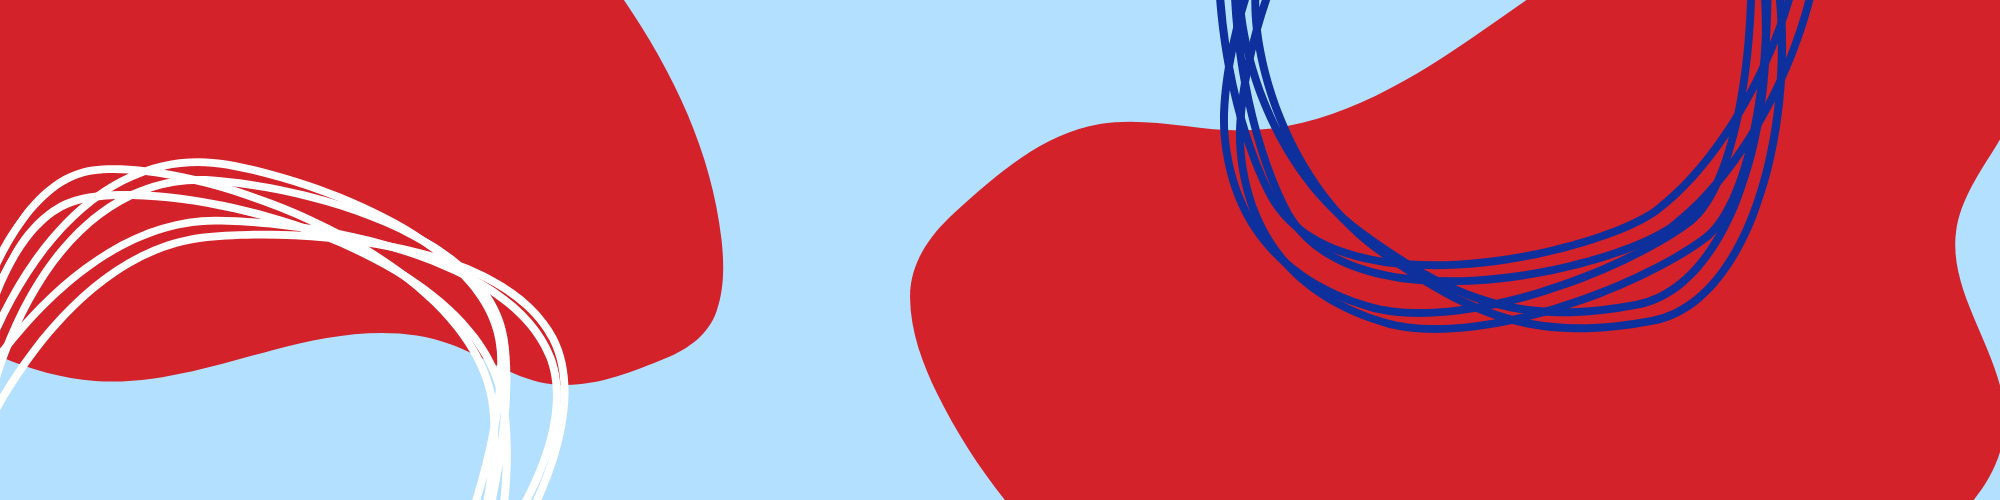 random shapes with red on top of a blue background